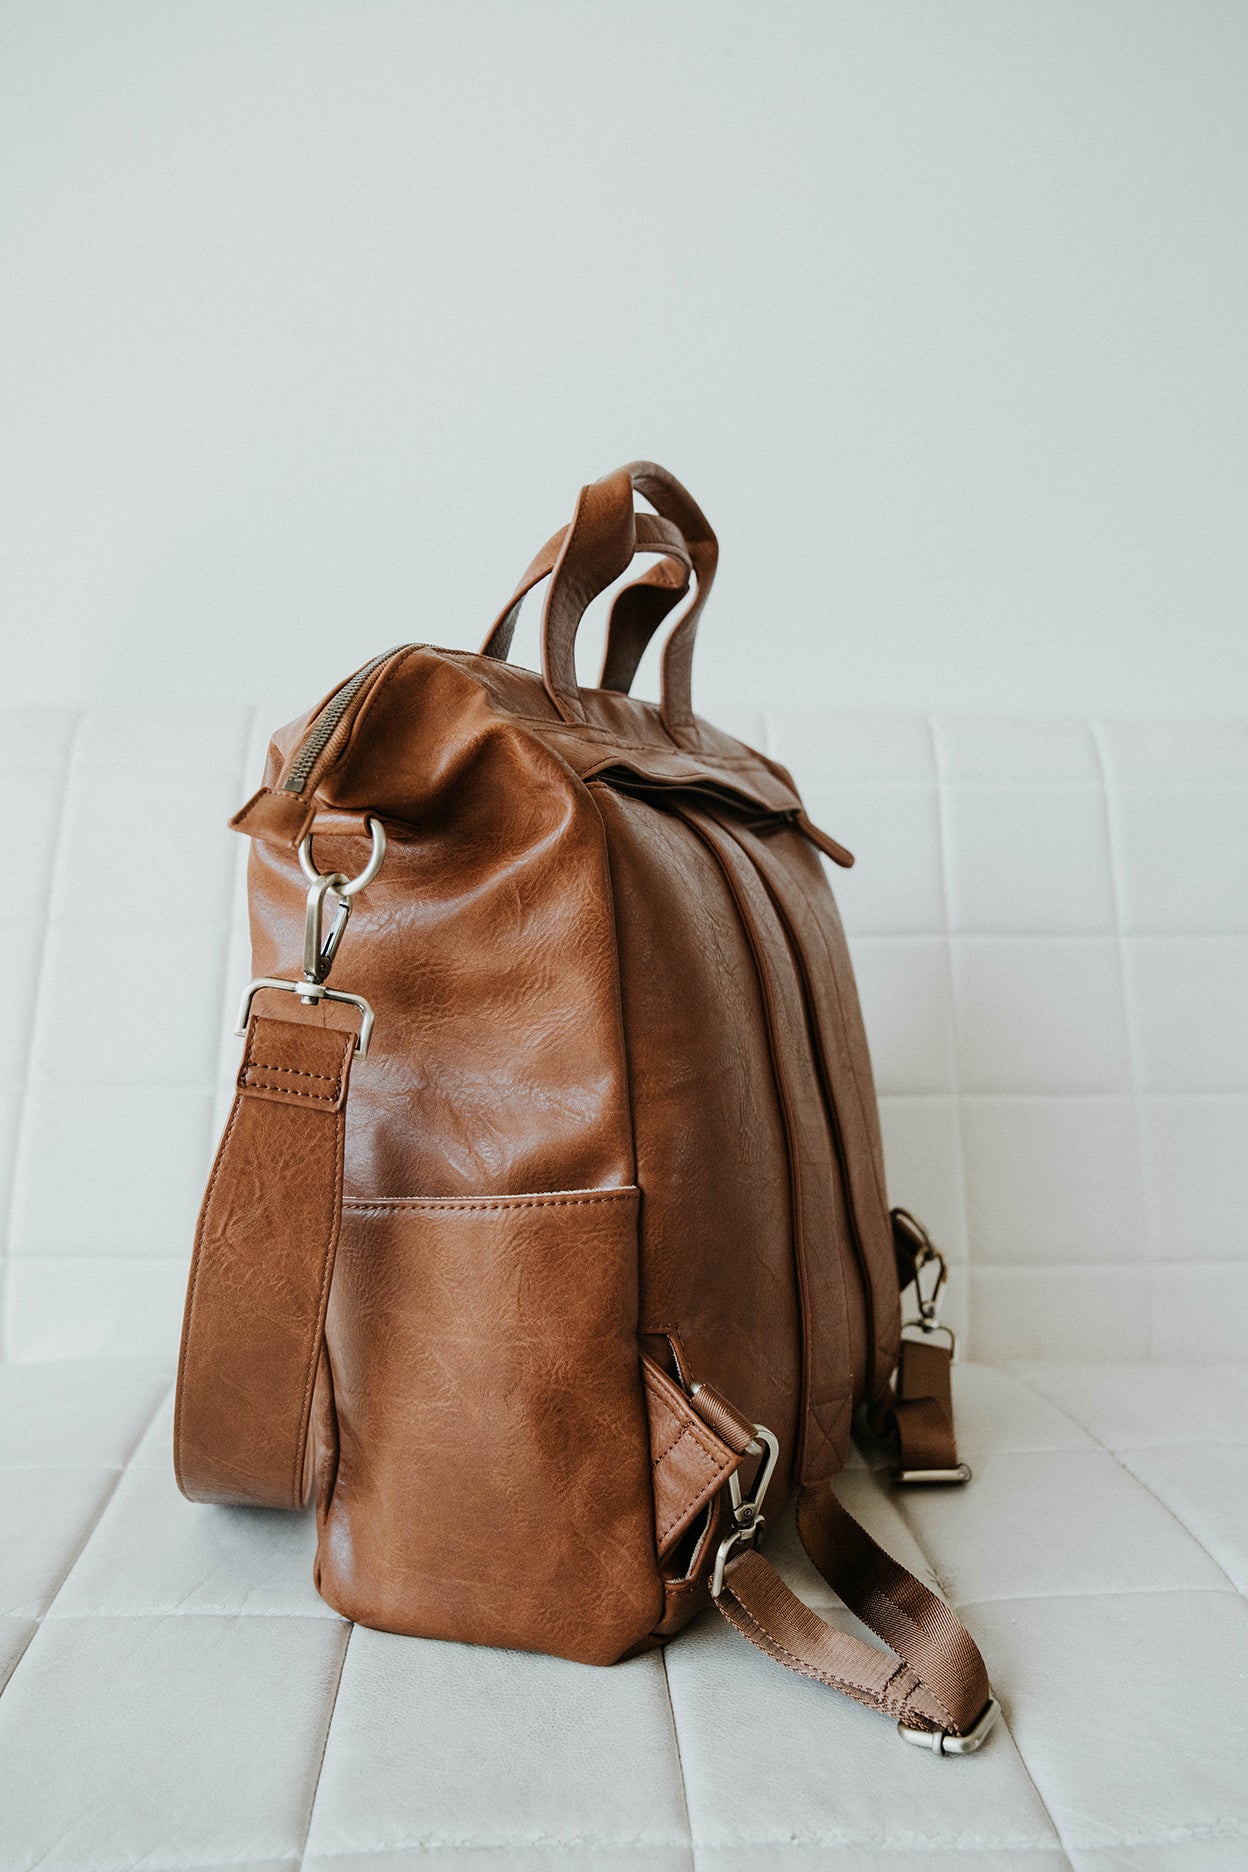 The Courtney - Our Full Size Versatile Camera Bag (Brown is a pre-order for February Delivery) Black is in stock.